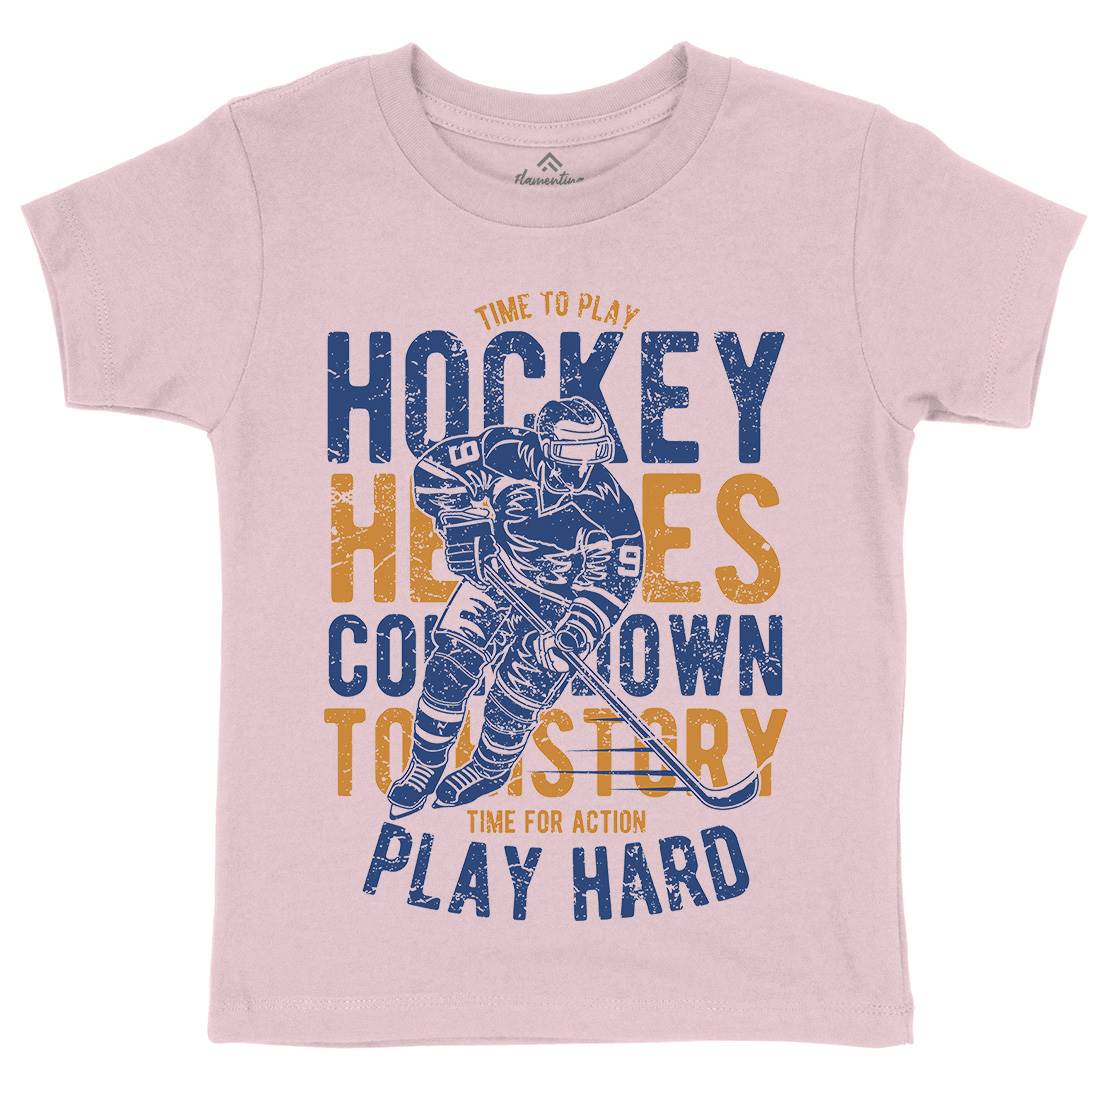 Time To Play Hockey Kids Crew Neck T-Shirt Sport A179